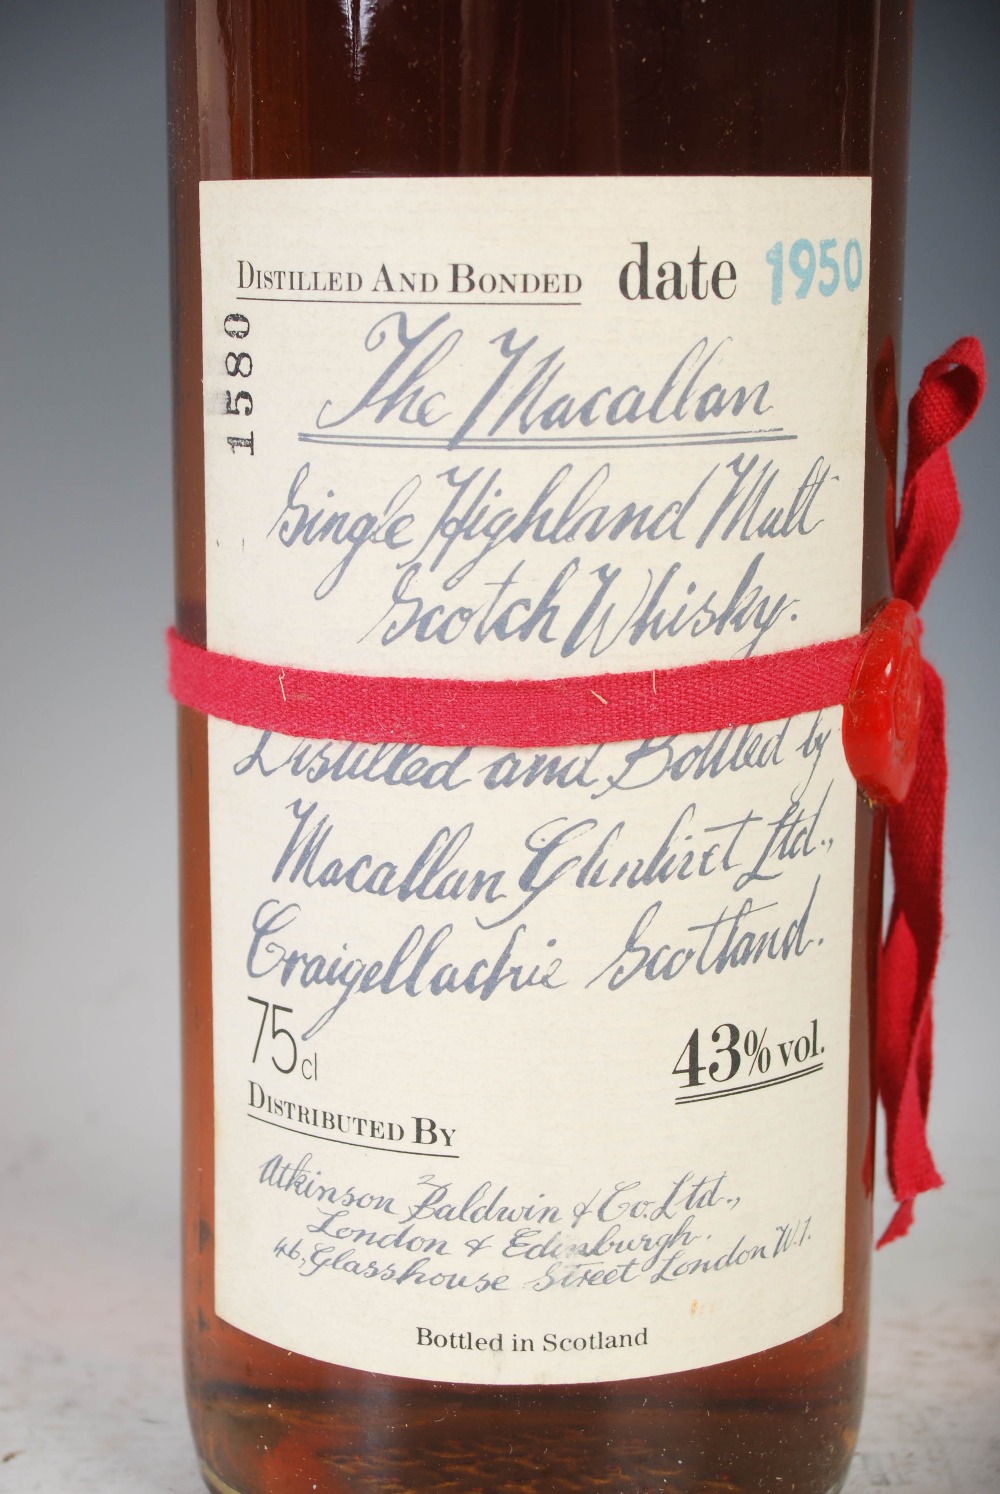 A boxed bottle of The Macallan Single Highland Malt Scotch Whisky 1950, Distilled and Bonded 1950, - Image 3 of 7